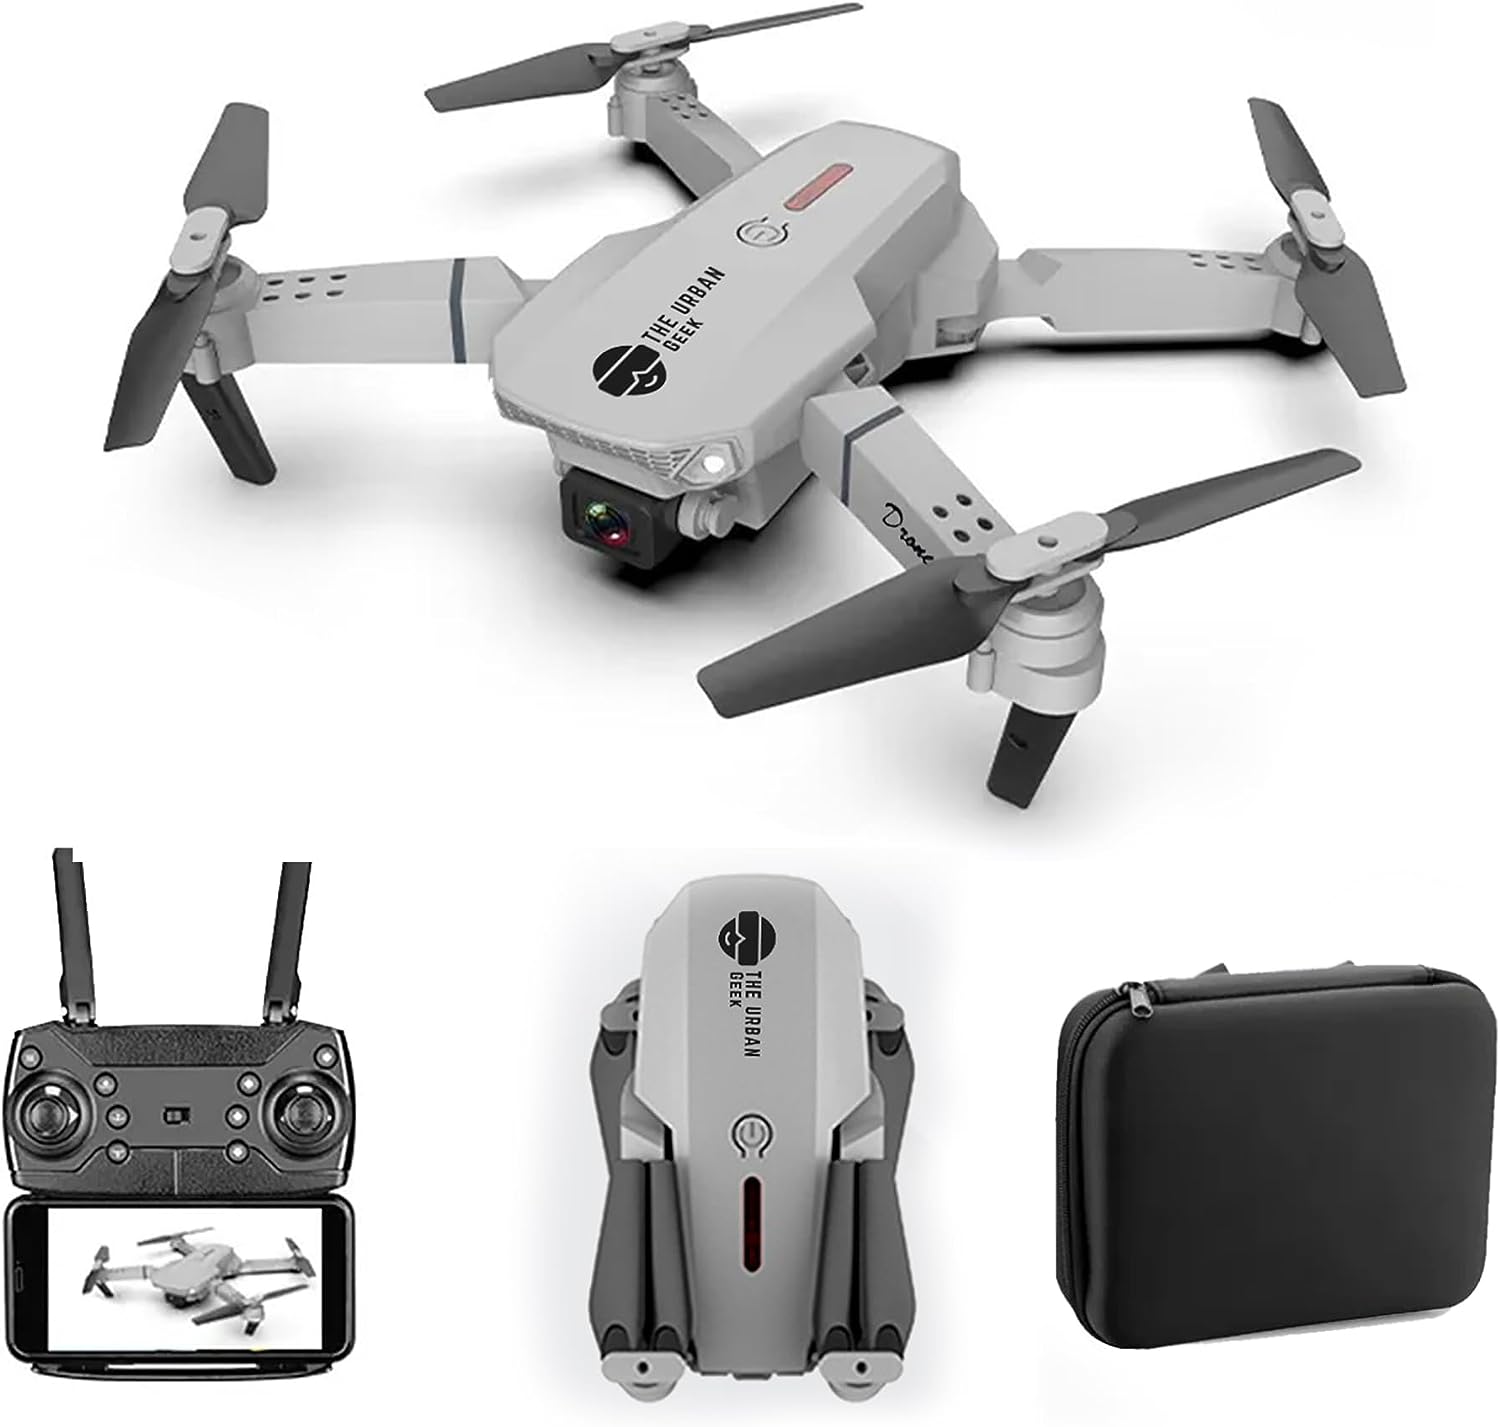 TheUrbanGeek E88 Drone with Dual Camera – Foldable FPV Live Video RC Quadcopter with Altitude Hold, One Key Return, 360 Degree Flip, Intelligent Control – Remote & App Control – Gray